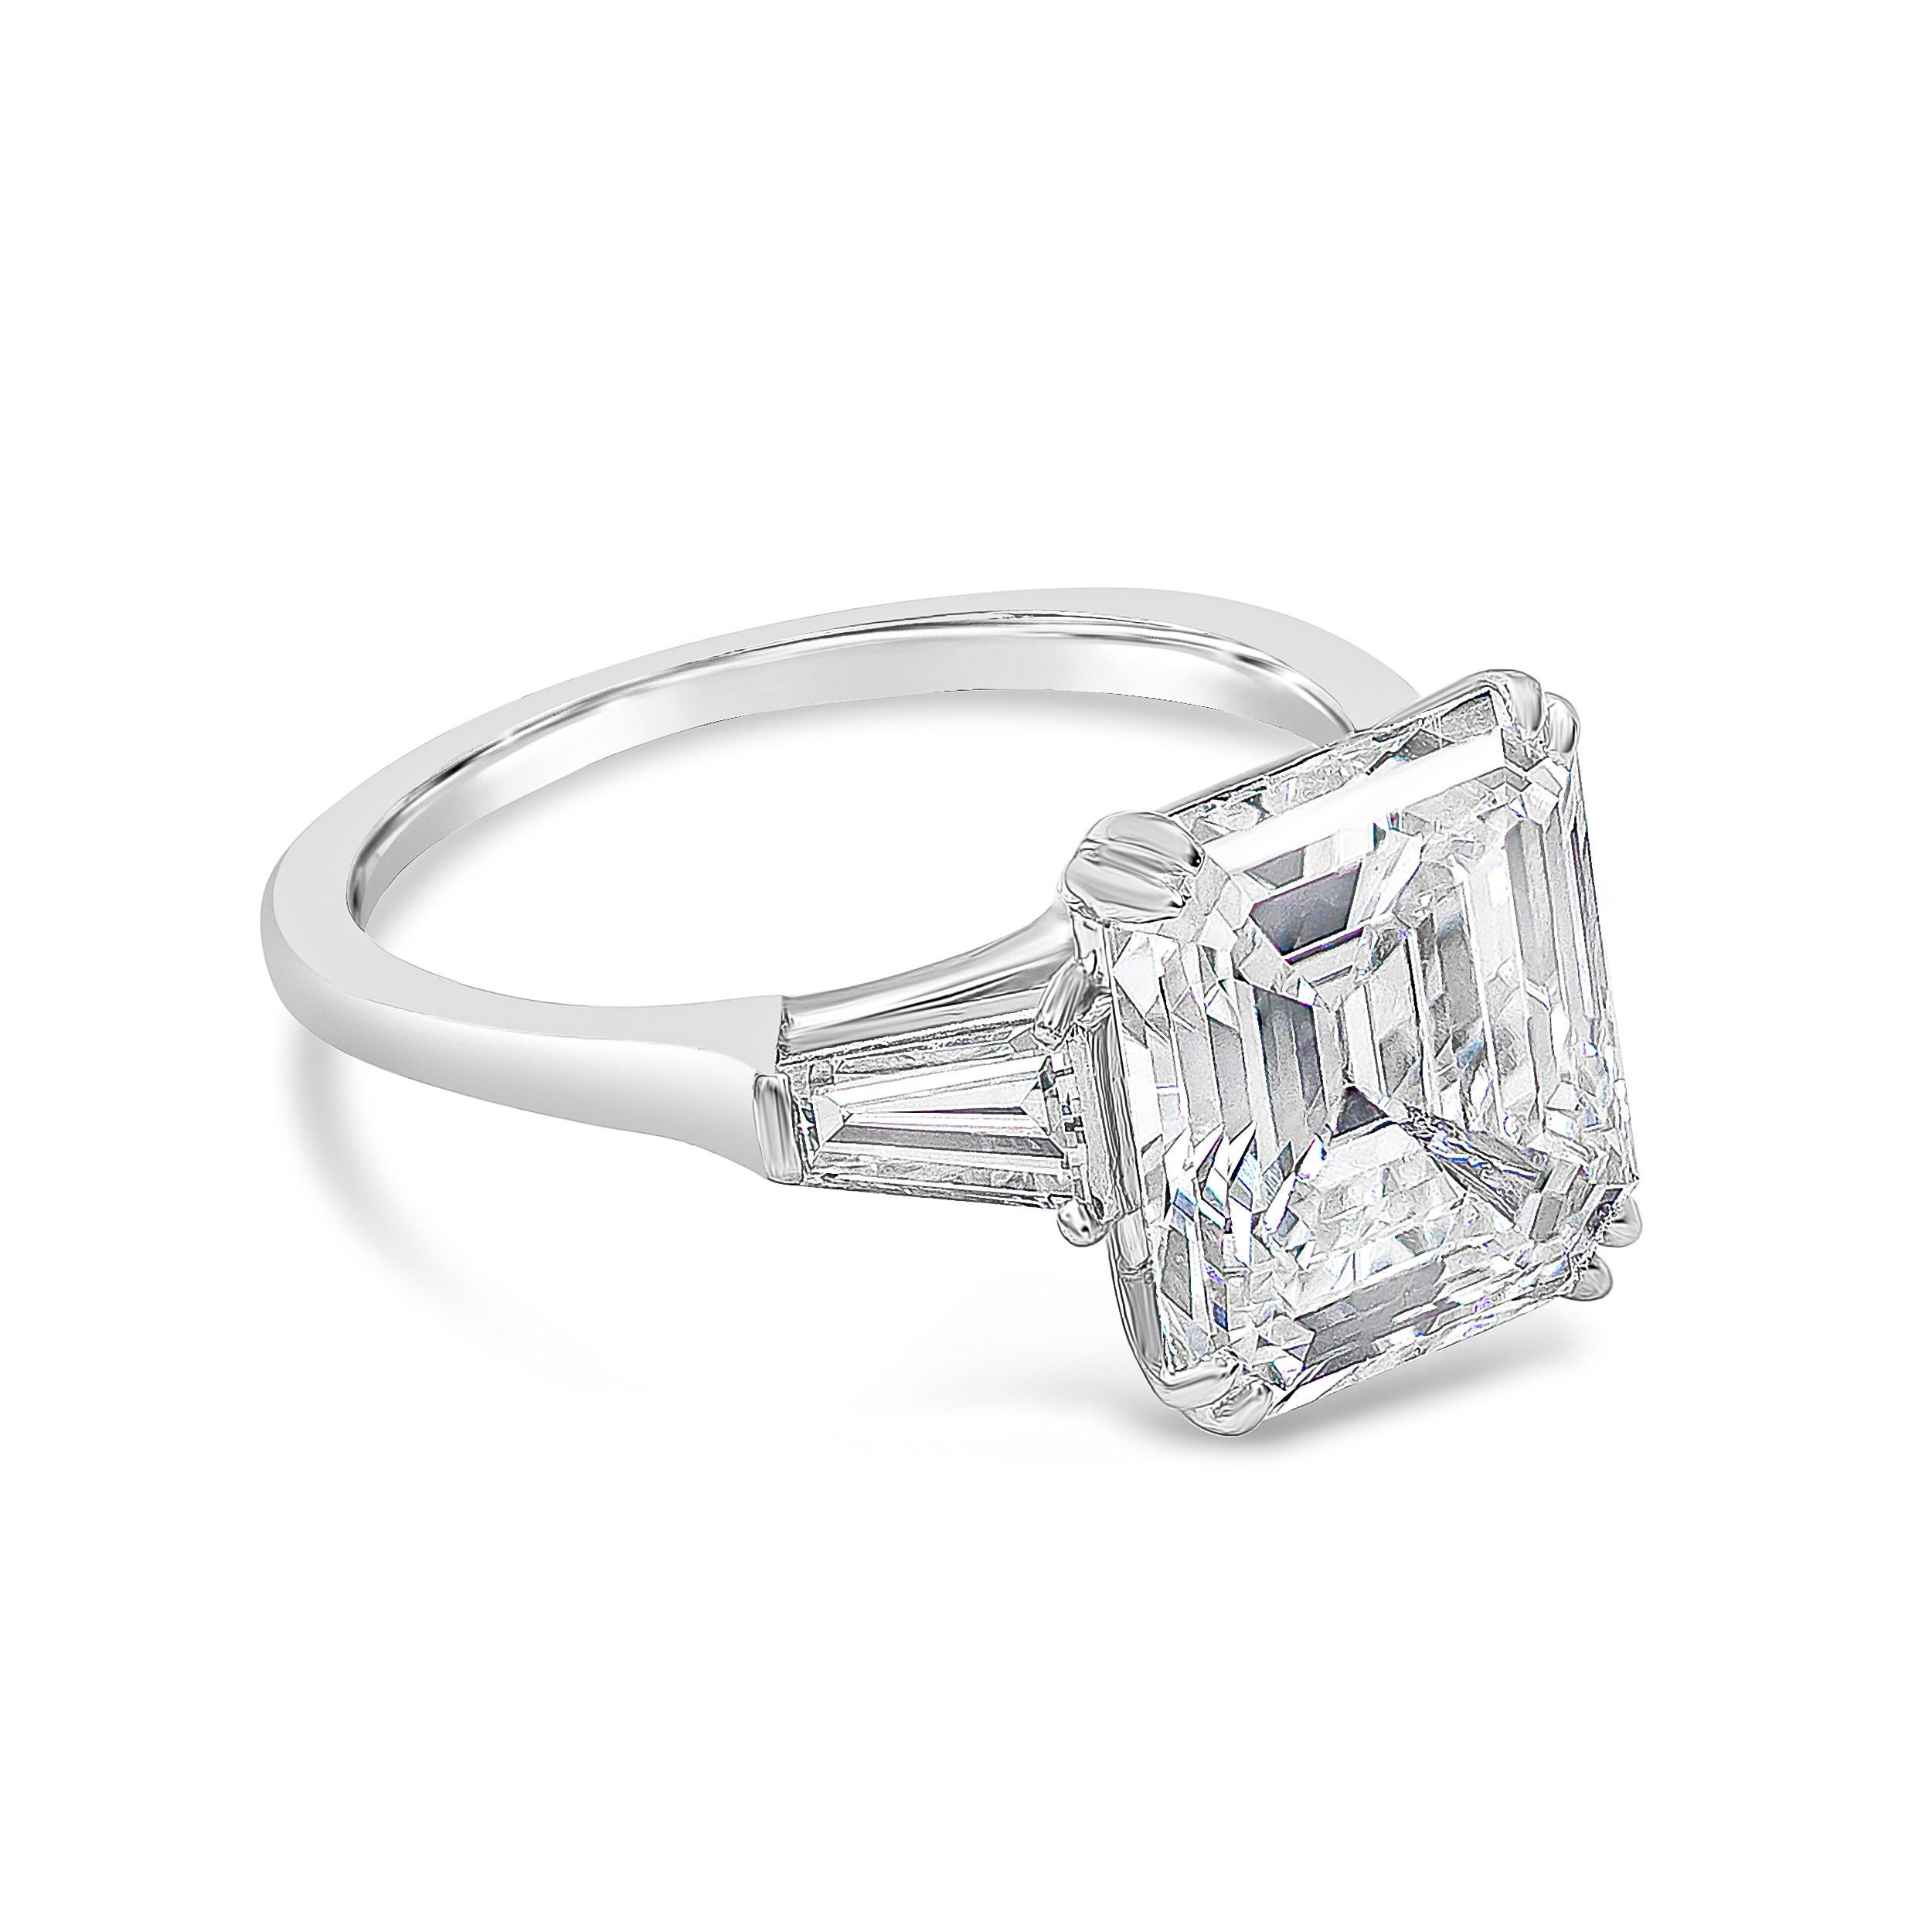 A classic Harry Winston engagement ring style showcasing a 4.01 carat emerald cut diamond certified by GIA as H color, VS1 clarity. Flanking the center diamond are two tapered baguette diamonds weighing 0.55 carats total. Set in a polished platinum